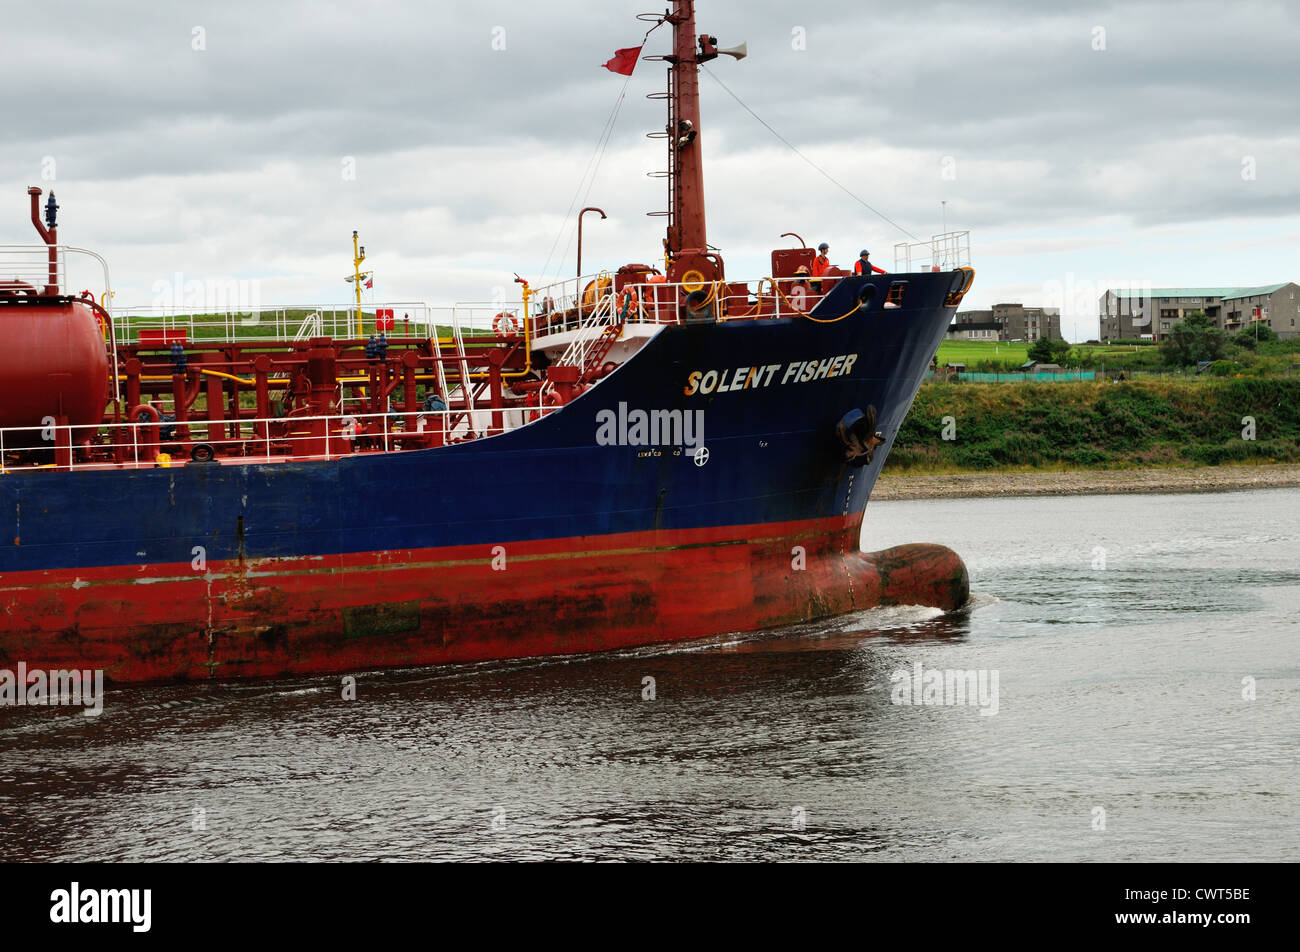 The Solent Fisher, crude oil tanker, entering Aberdeen harbour Stock Photo